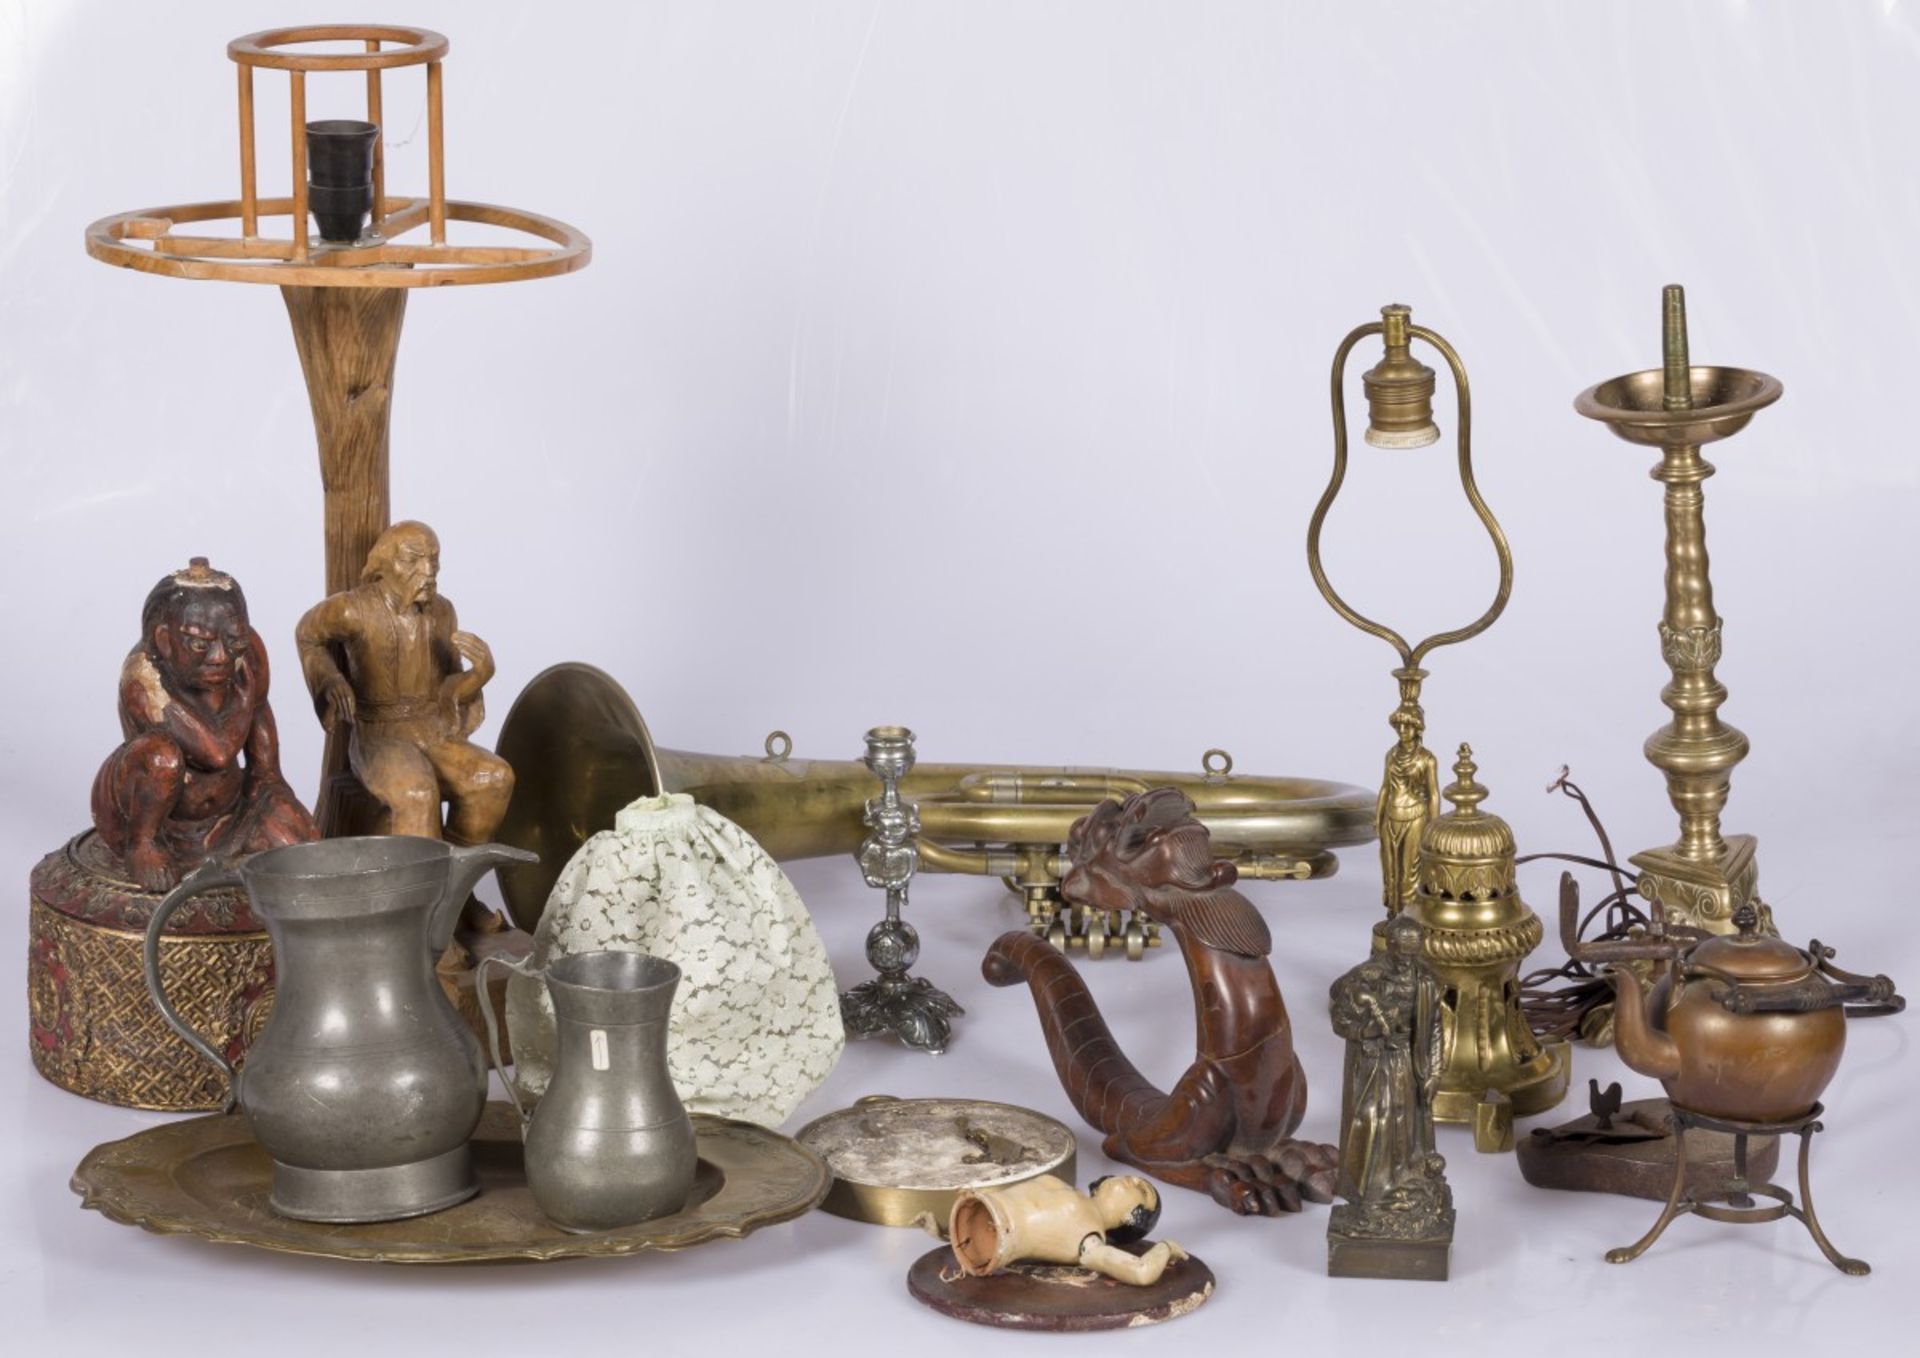 A lot miscellaneous a.w. a pricket candlestick and a trombone, 20th century.